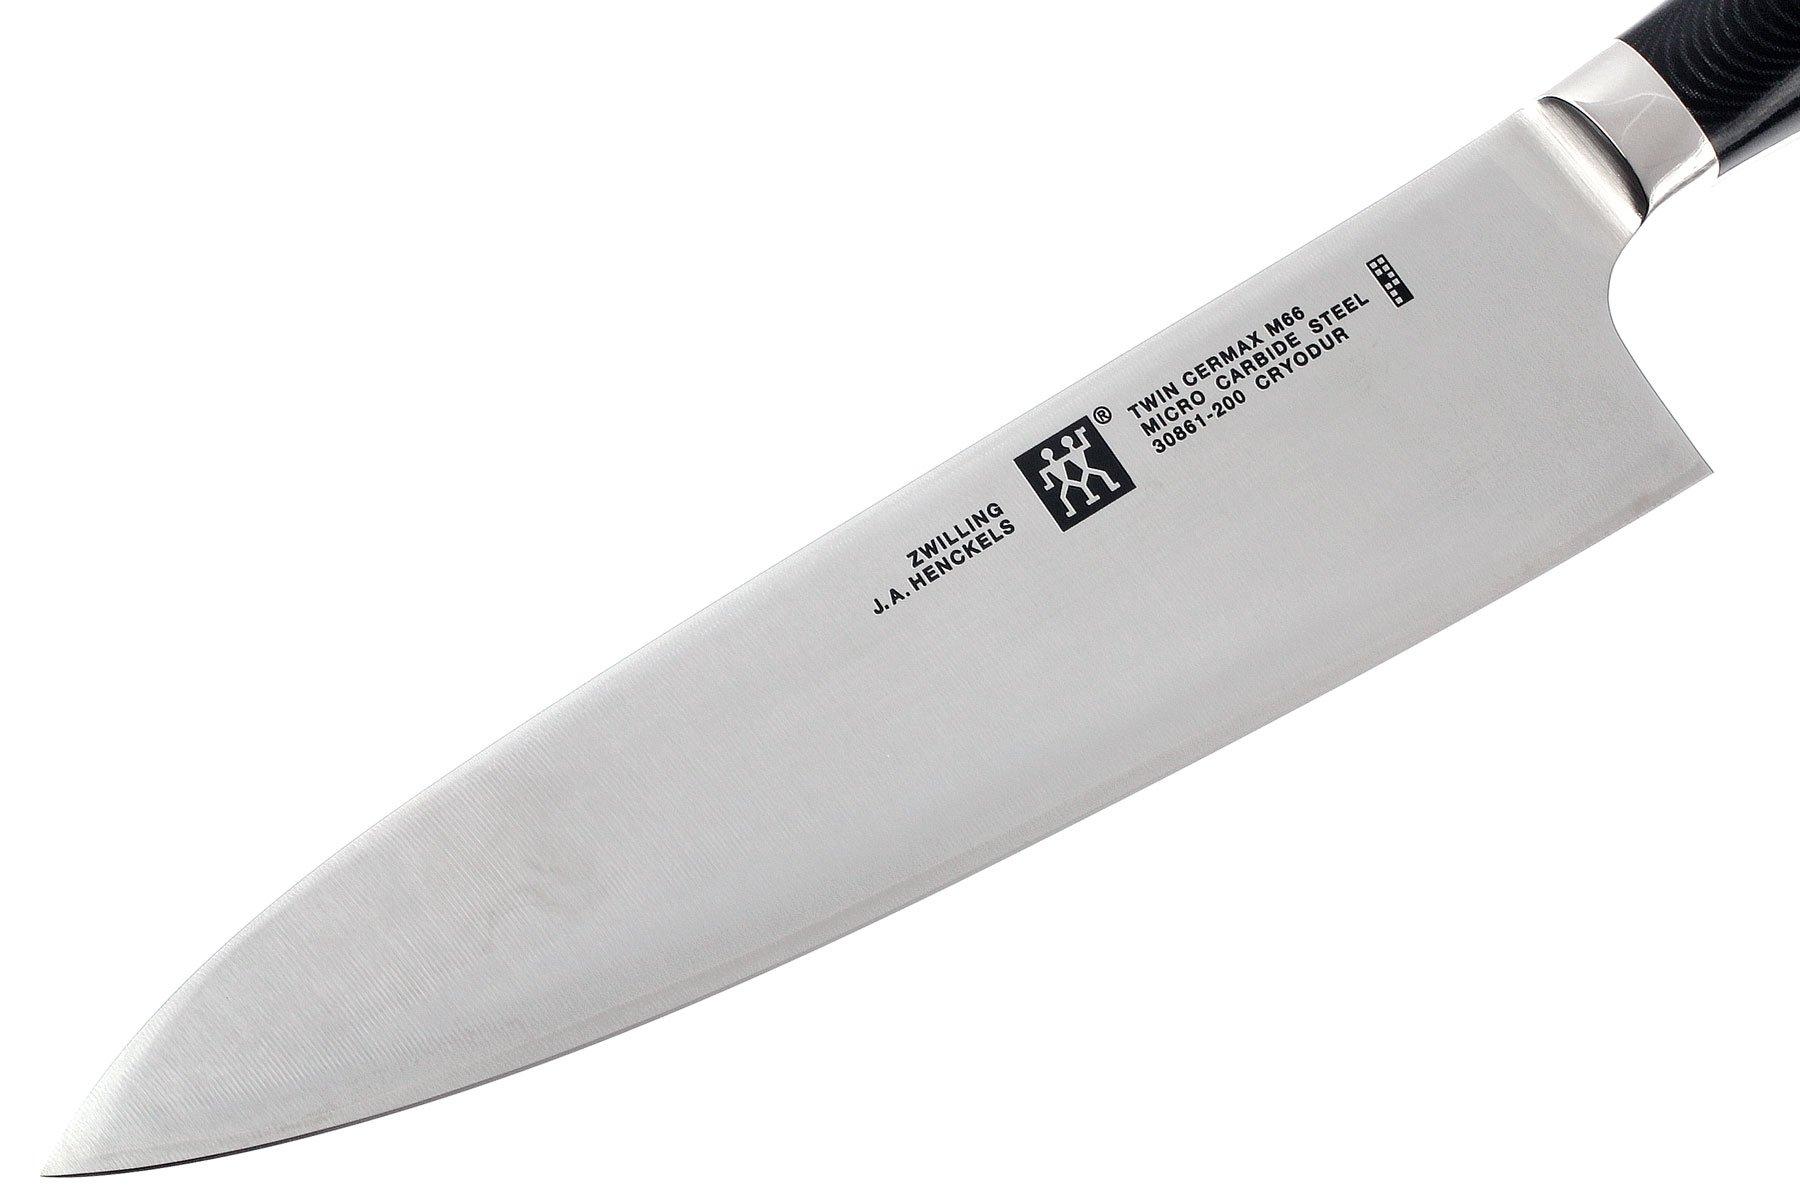 Zwilling Twin Cermax 30861-204-0, 100-layered damascus steel chef's knife,  20 cm